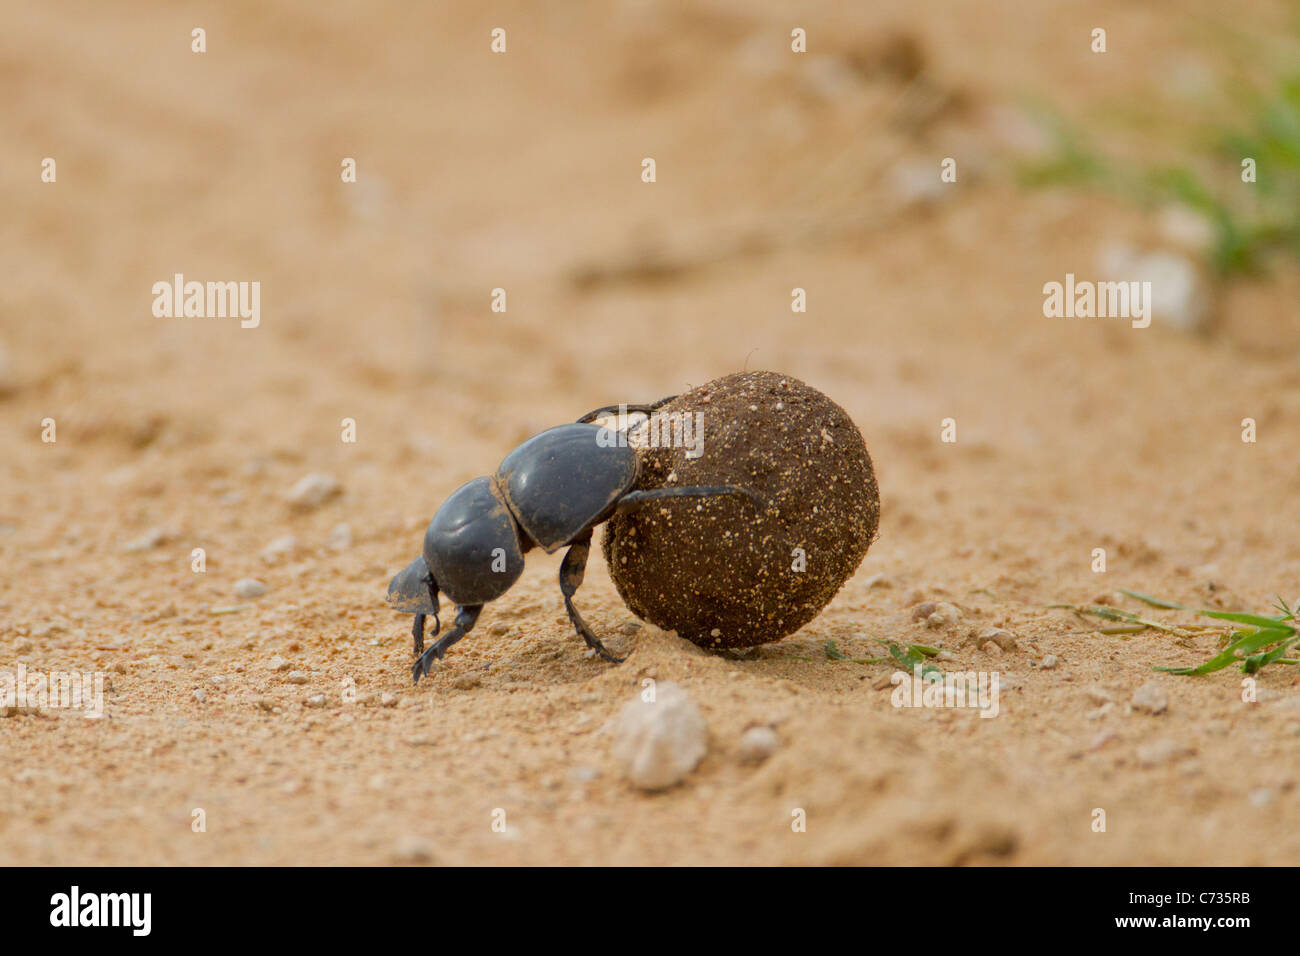 Dung beetle (scarabaeidae) at Addo Elephant Park in South Africa. Stock Photo